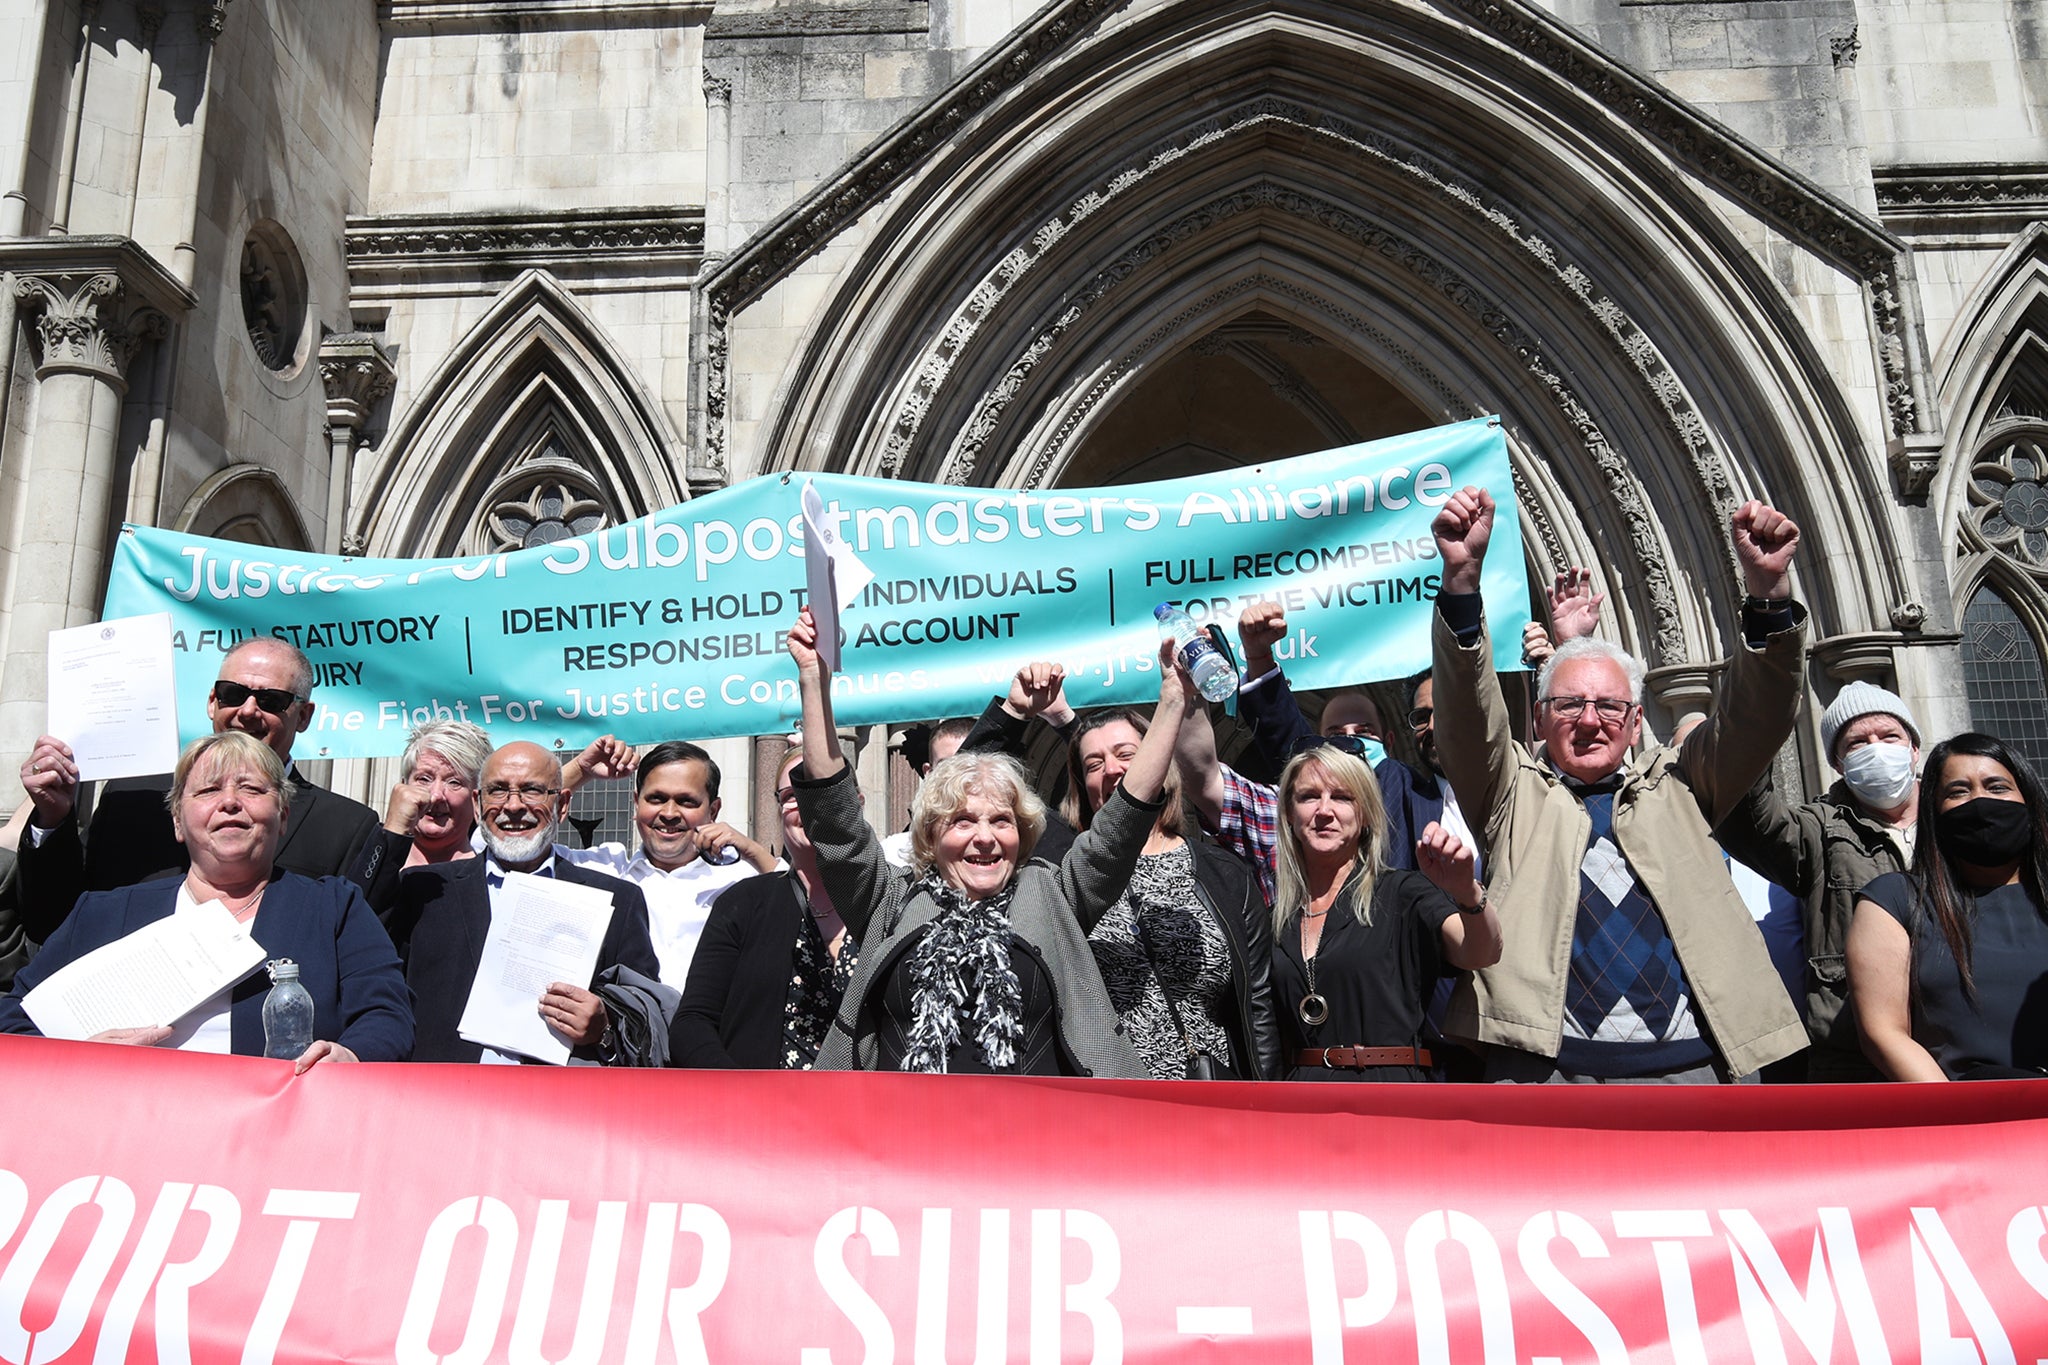 Sub-postmasters celebrate the high court ruling in 2019 which led to 39 having their convictions quashed